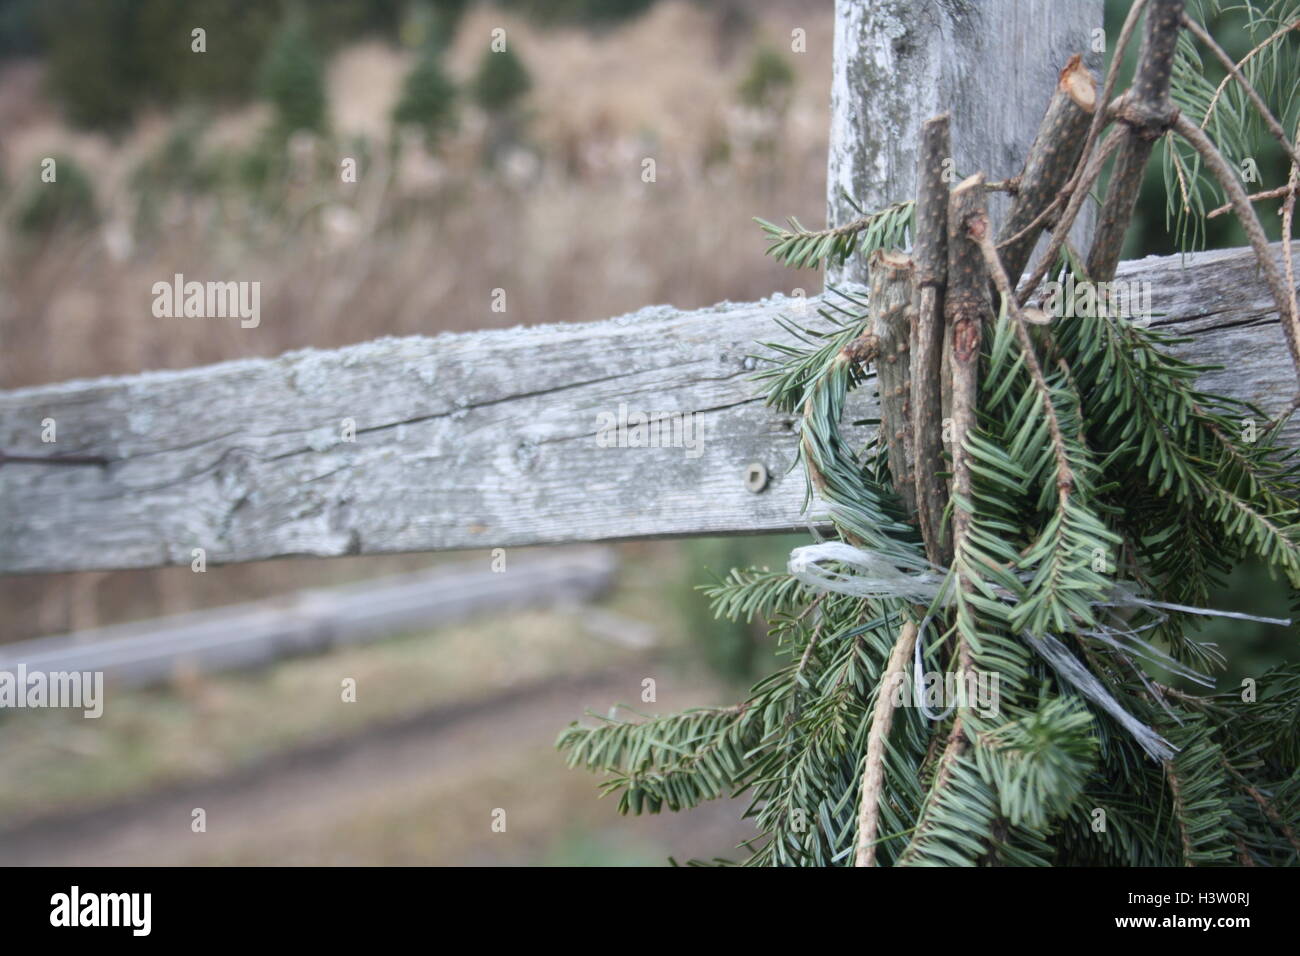 Bough of pine tree branches on wooden cross section. Stock Photo